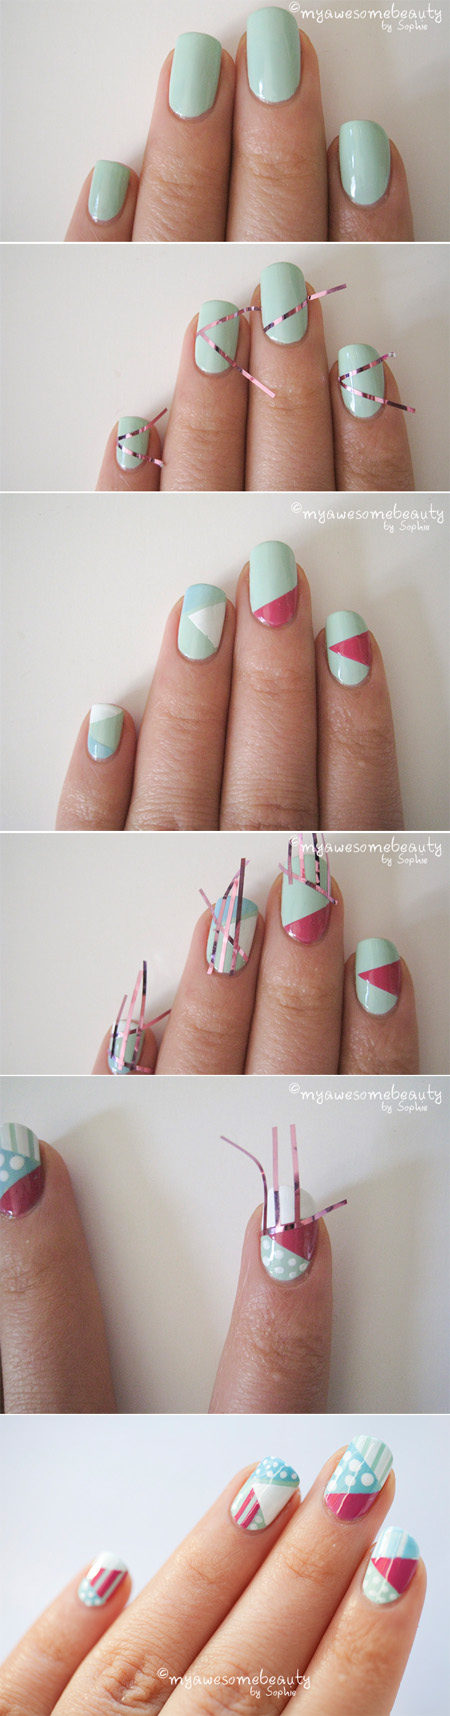 How to Do a Stripe Design with Tape | Nail Art Designs - YouTube